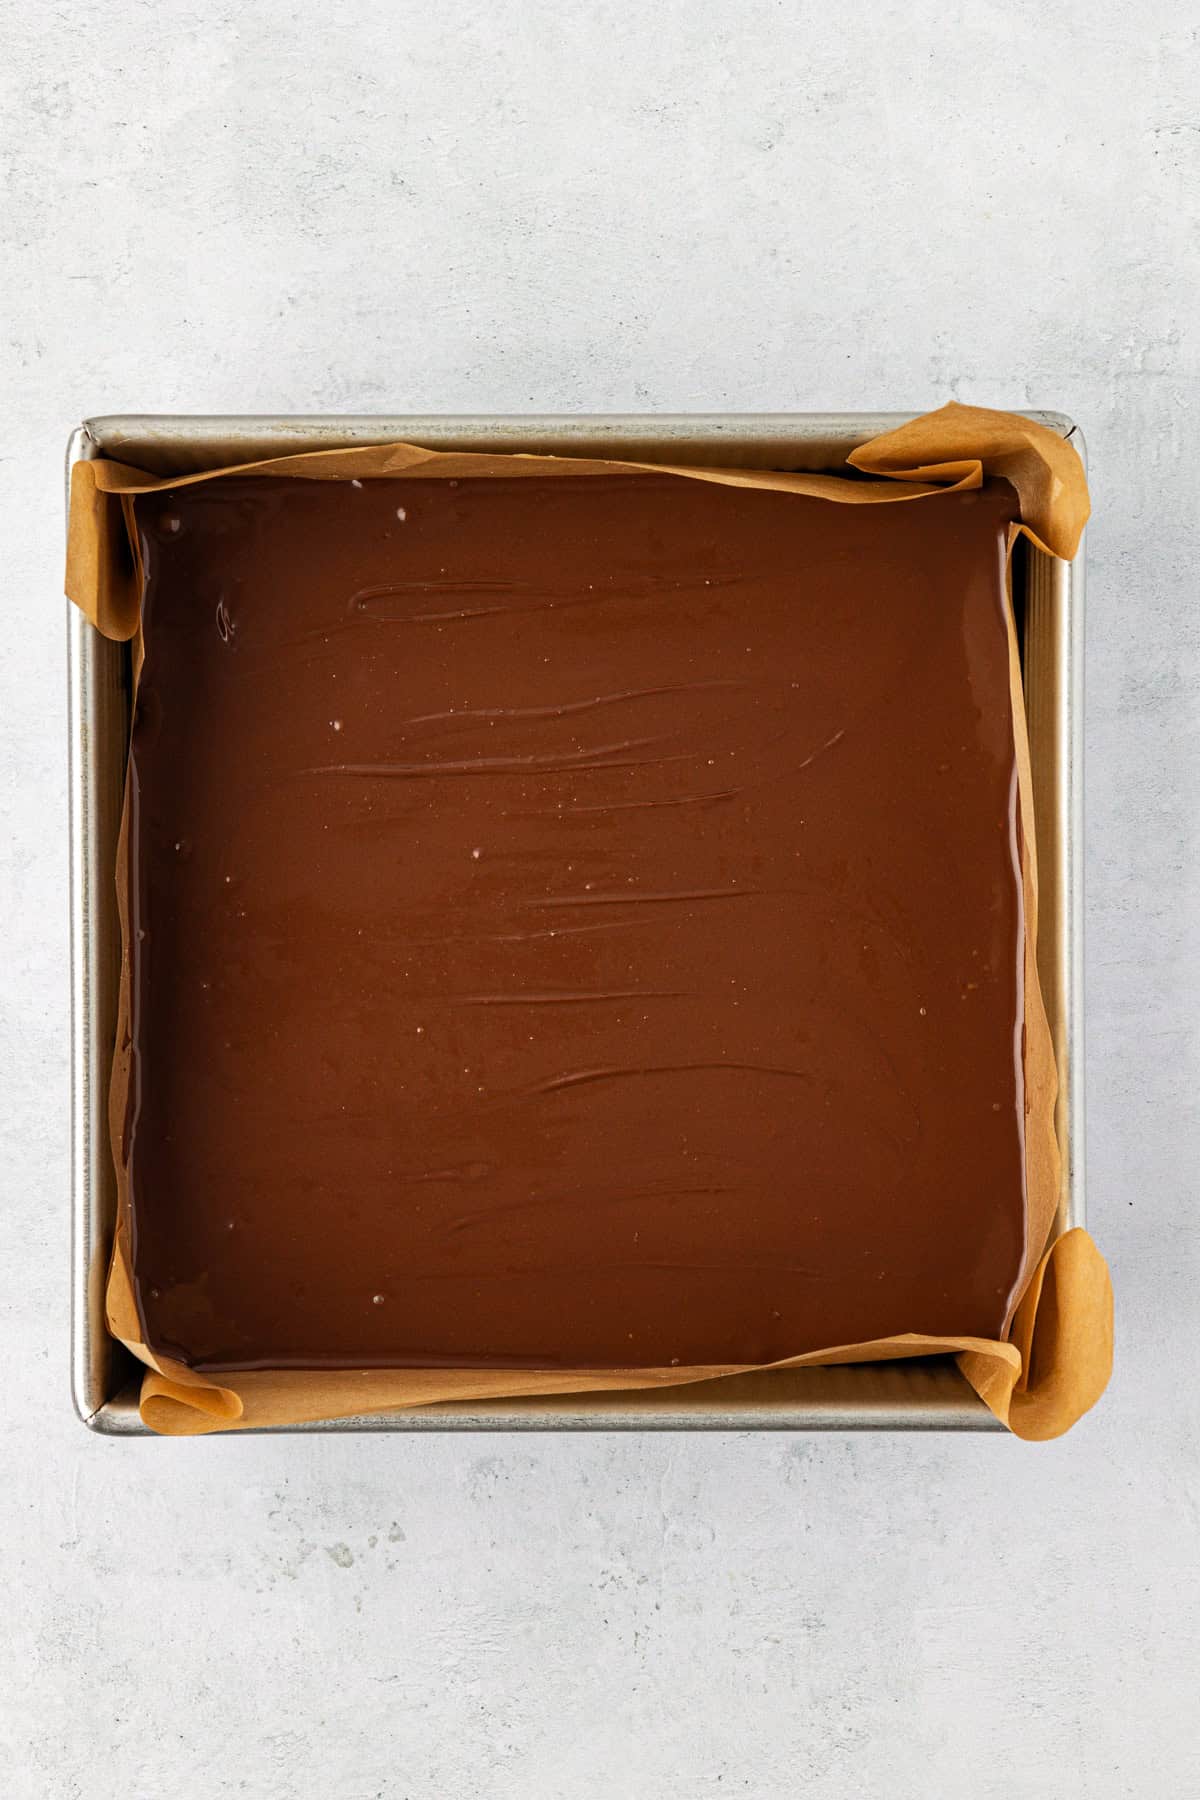 over head view of a square pan lined with parchment paper with a smooth chocolate layer in the pan